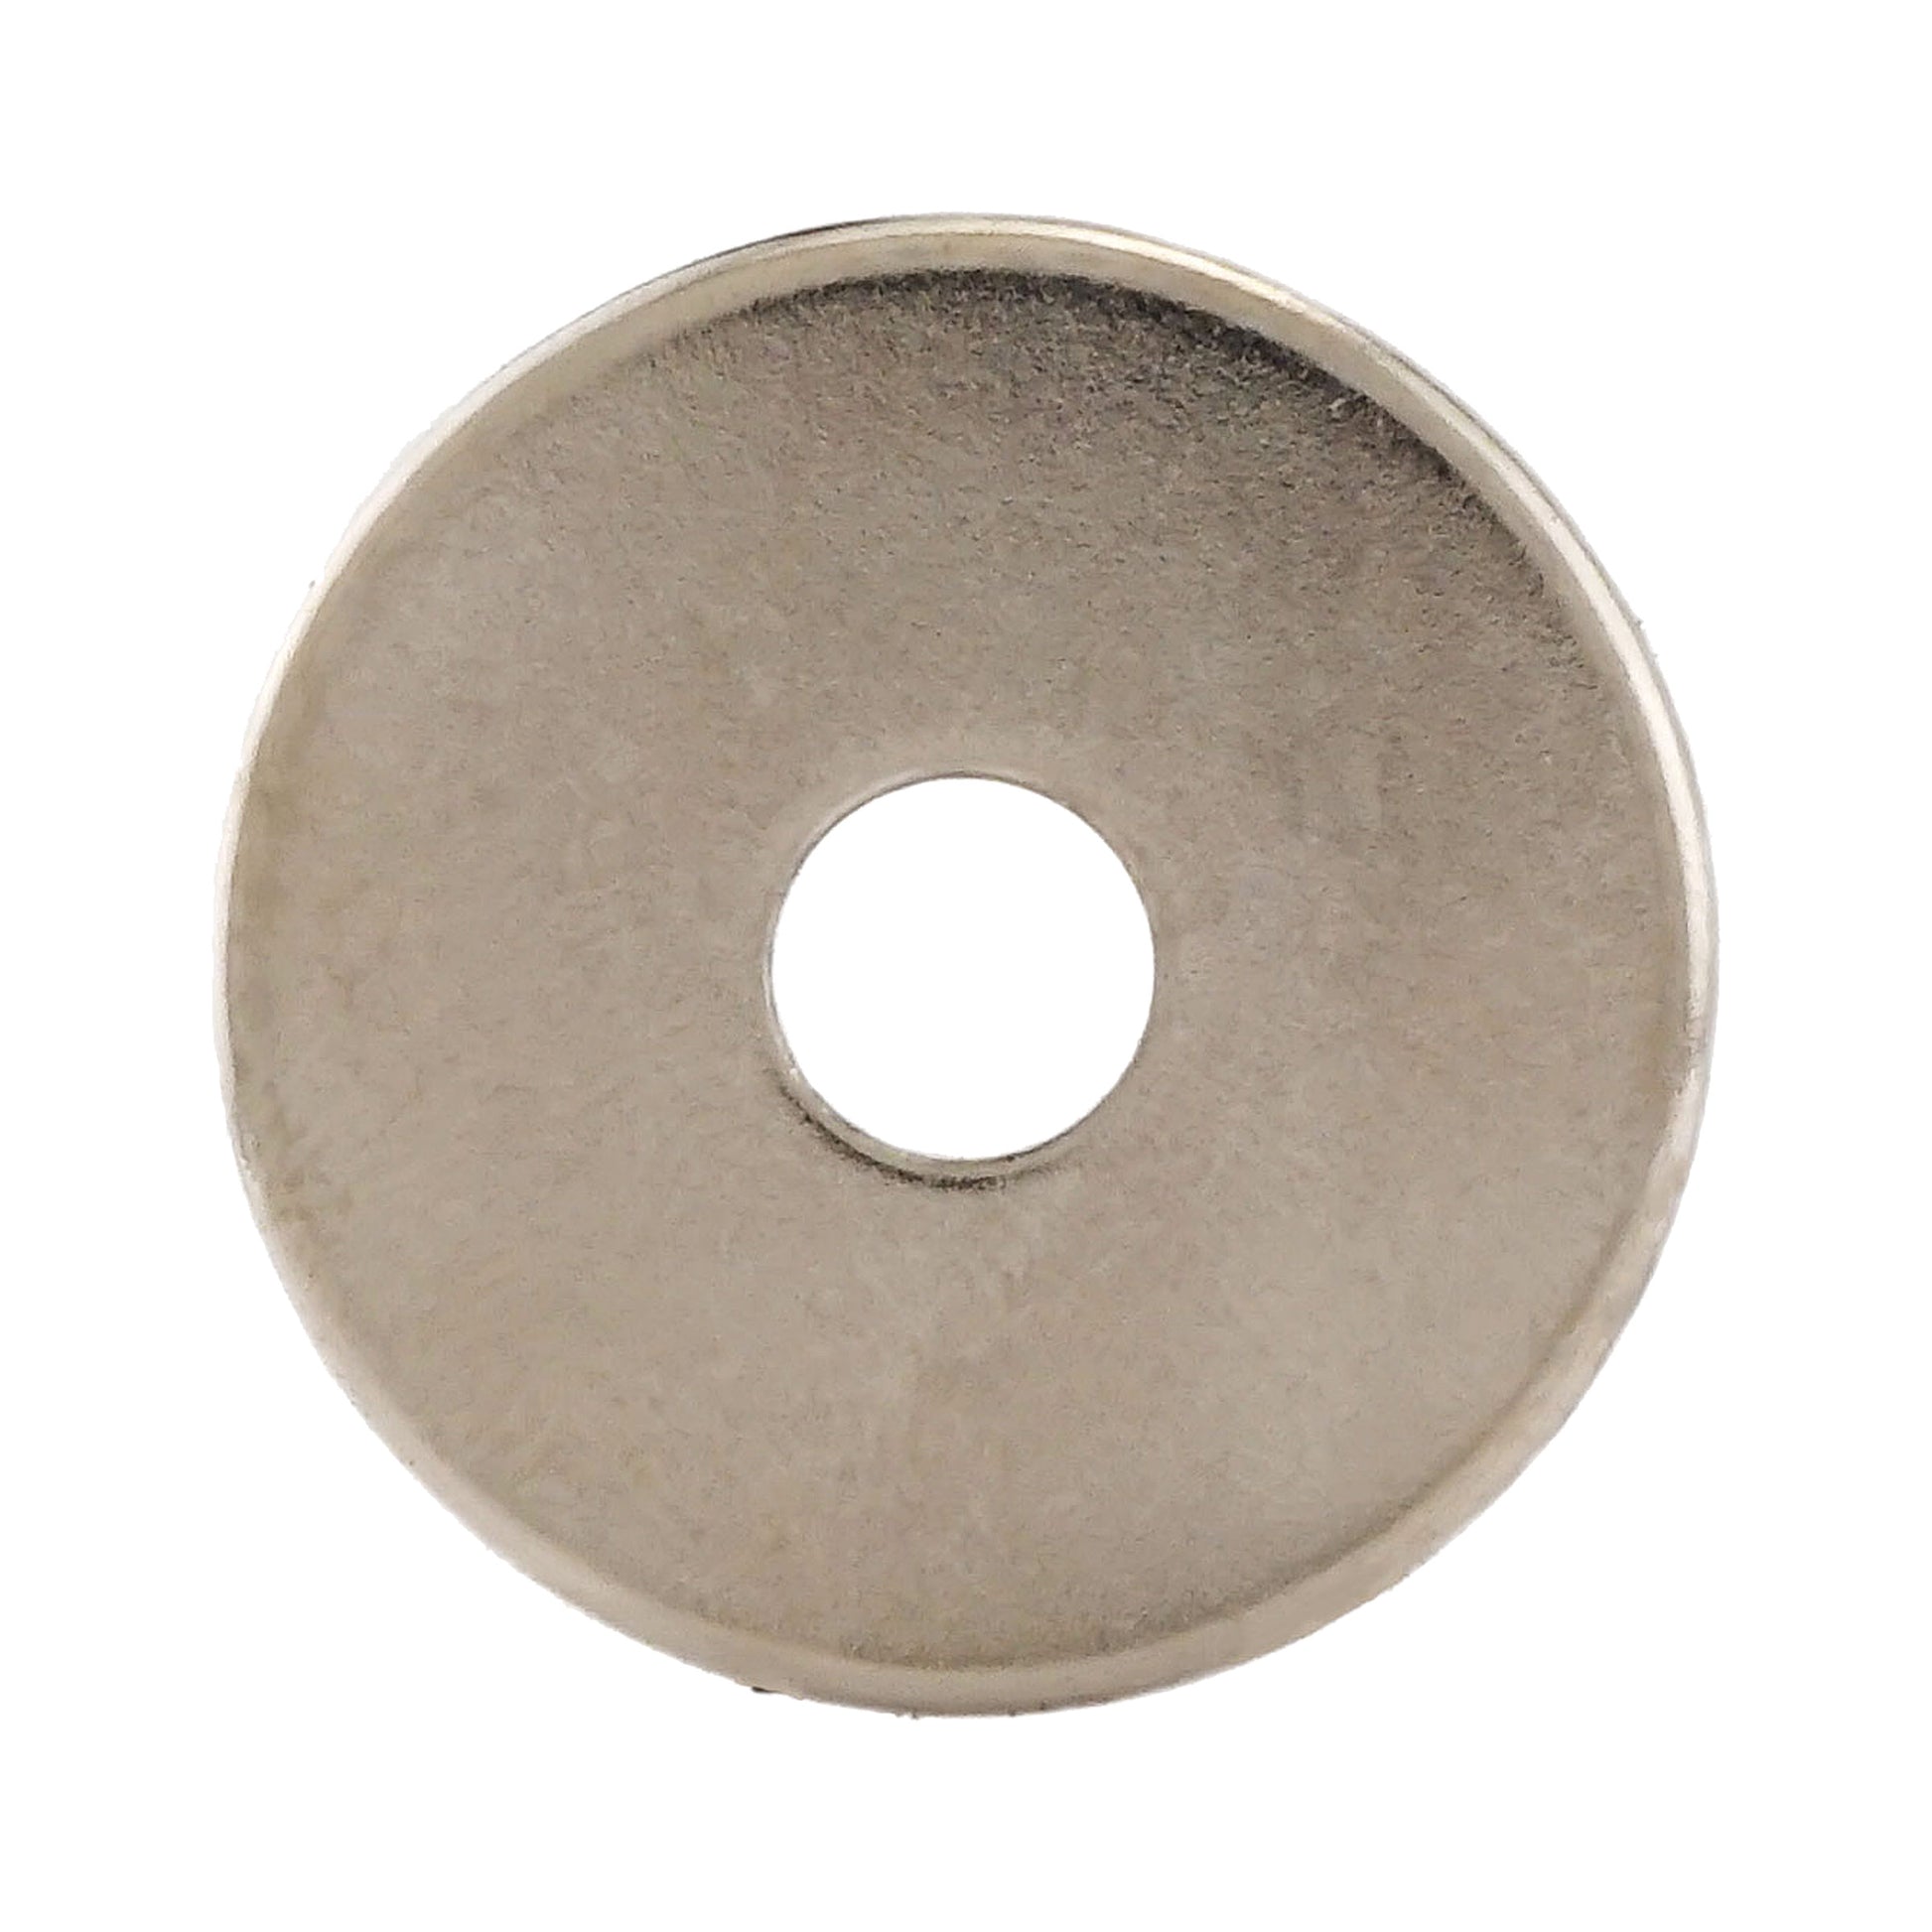 Load image into Gallery viewer, NR010025NS01 Neodymium Ring Magnet - Top View